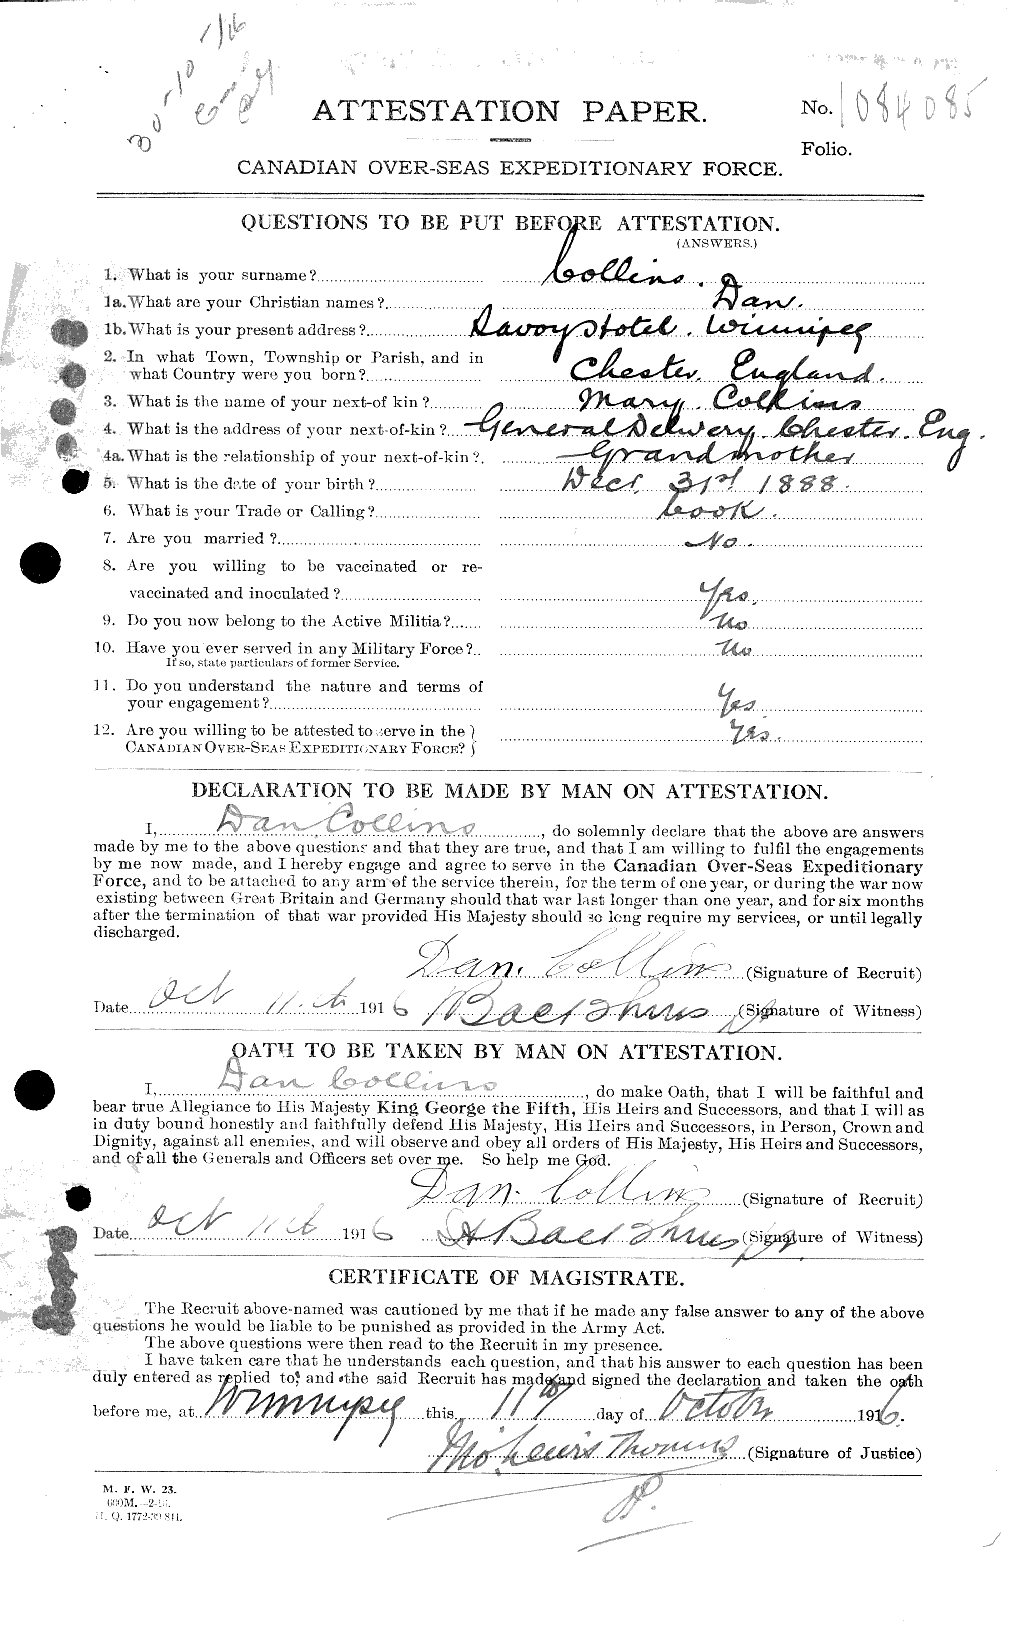 Personnel Records of the First World War - CEF 029067a